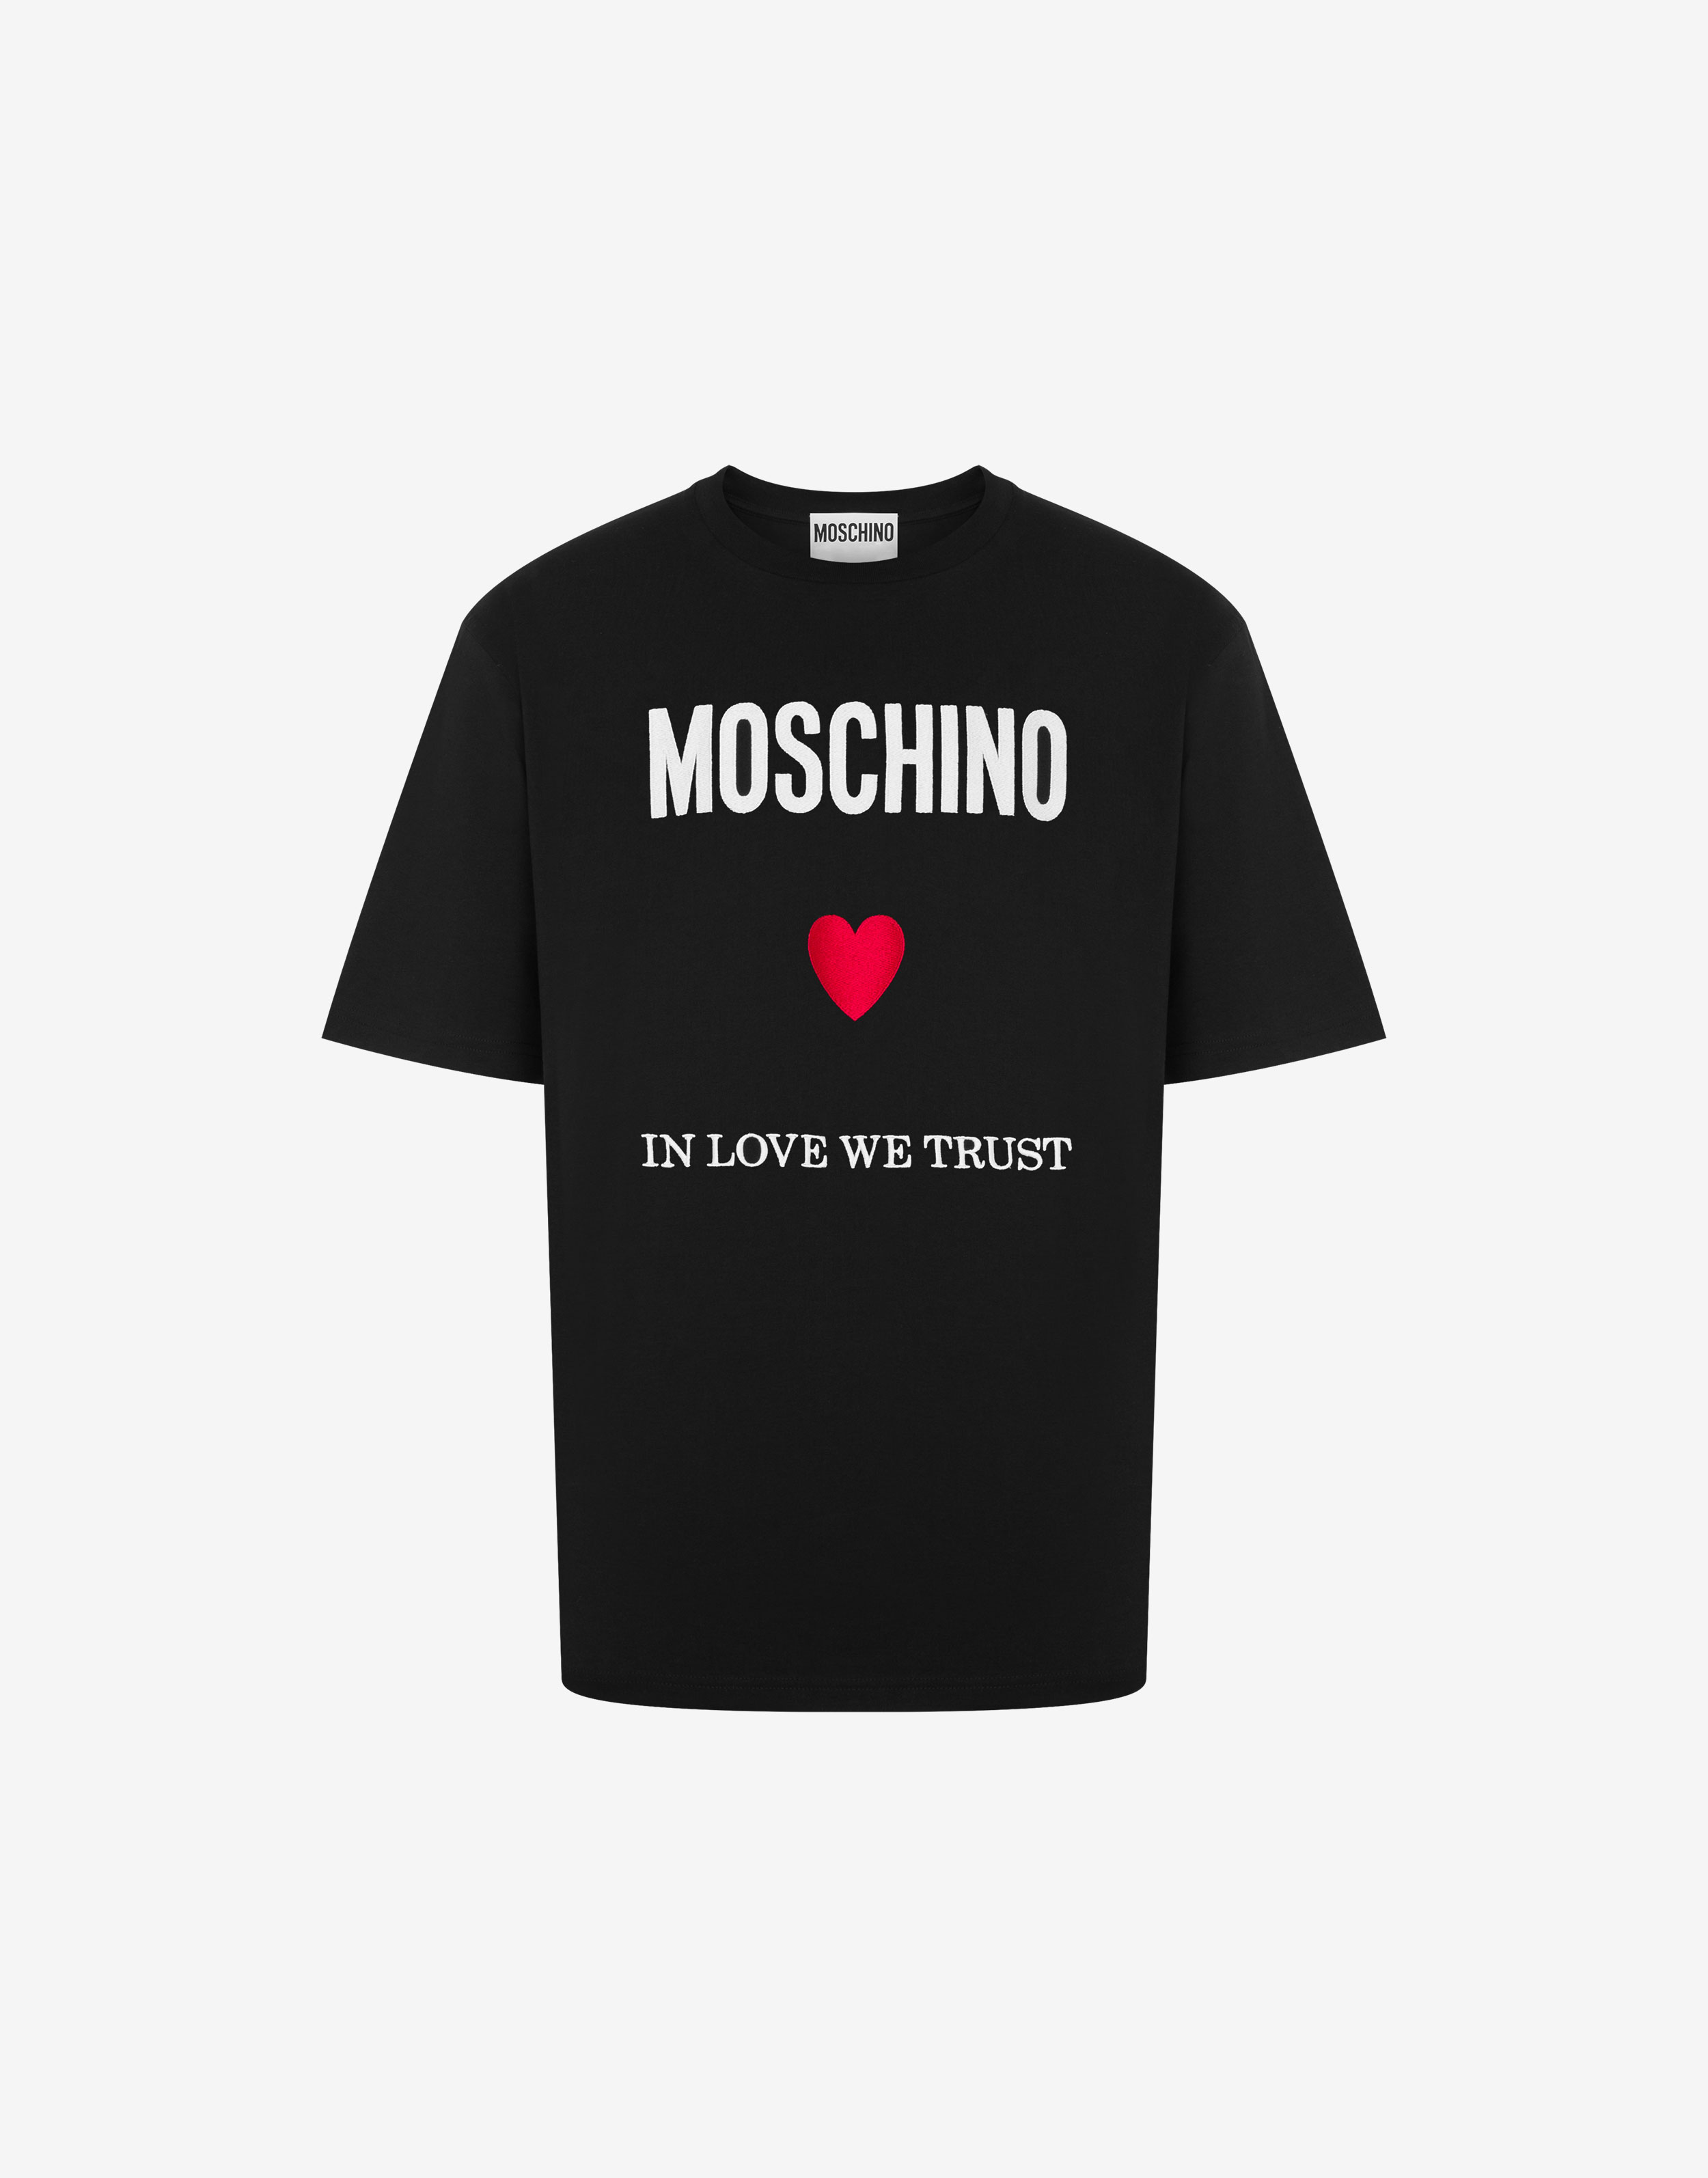 Moschino Top 100 Curated by Trendlistr, by Trendlistr